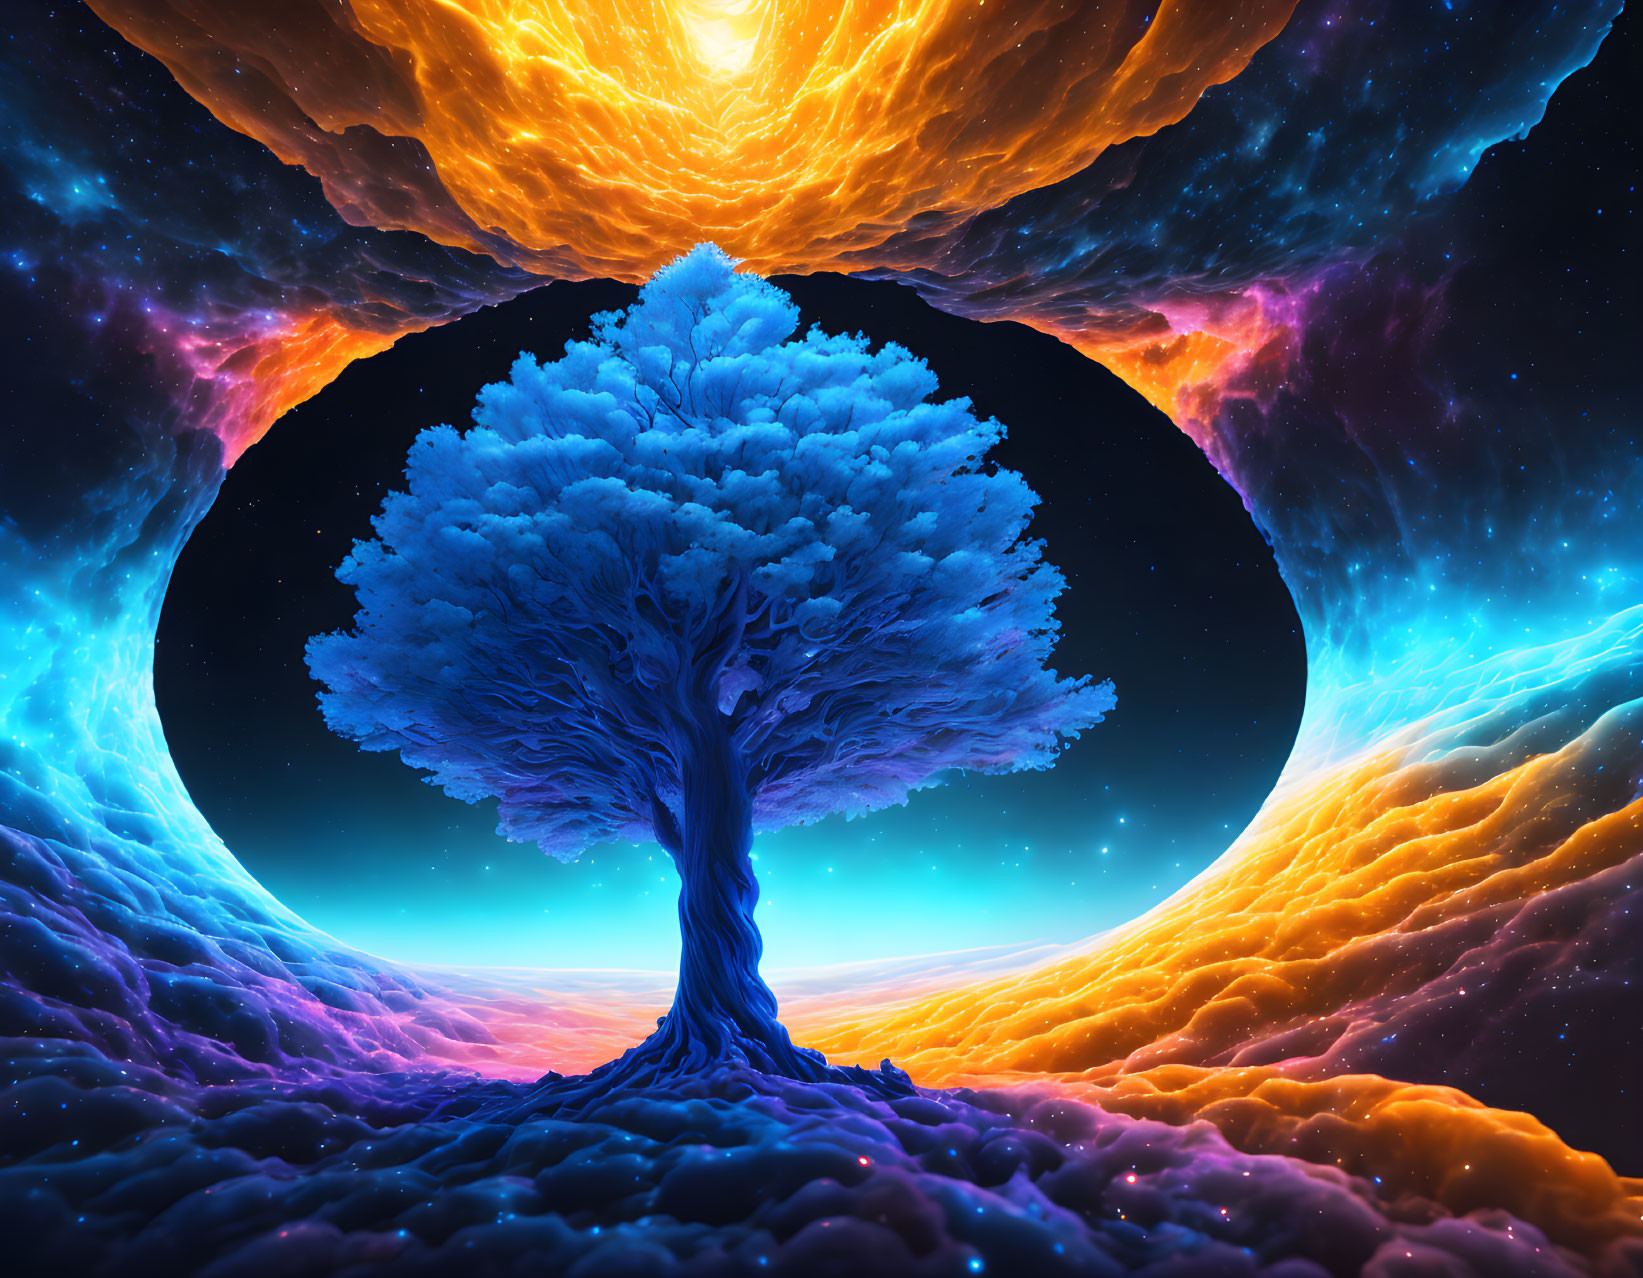 Surreal image of vibrant tree with blue foliage amid swirling orange and yellow clouds against starry sky